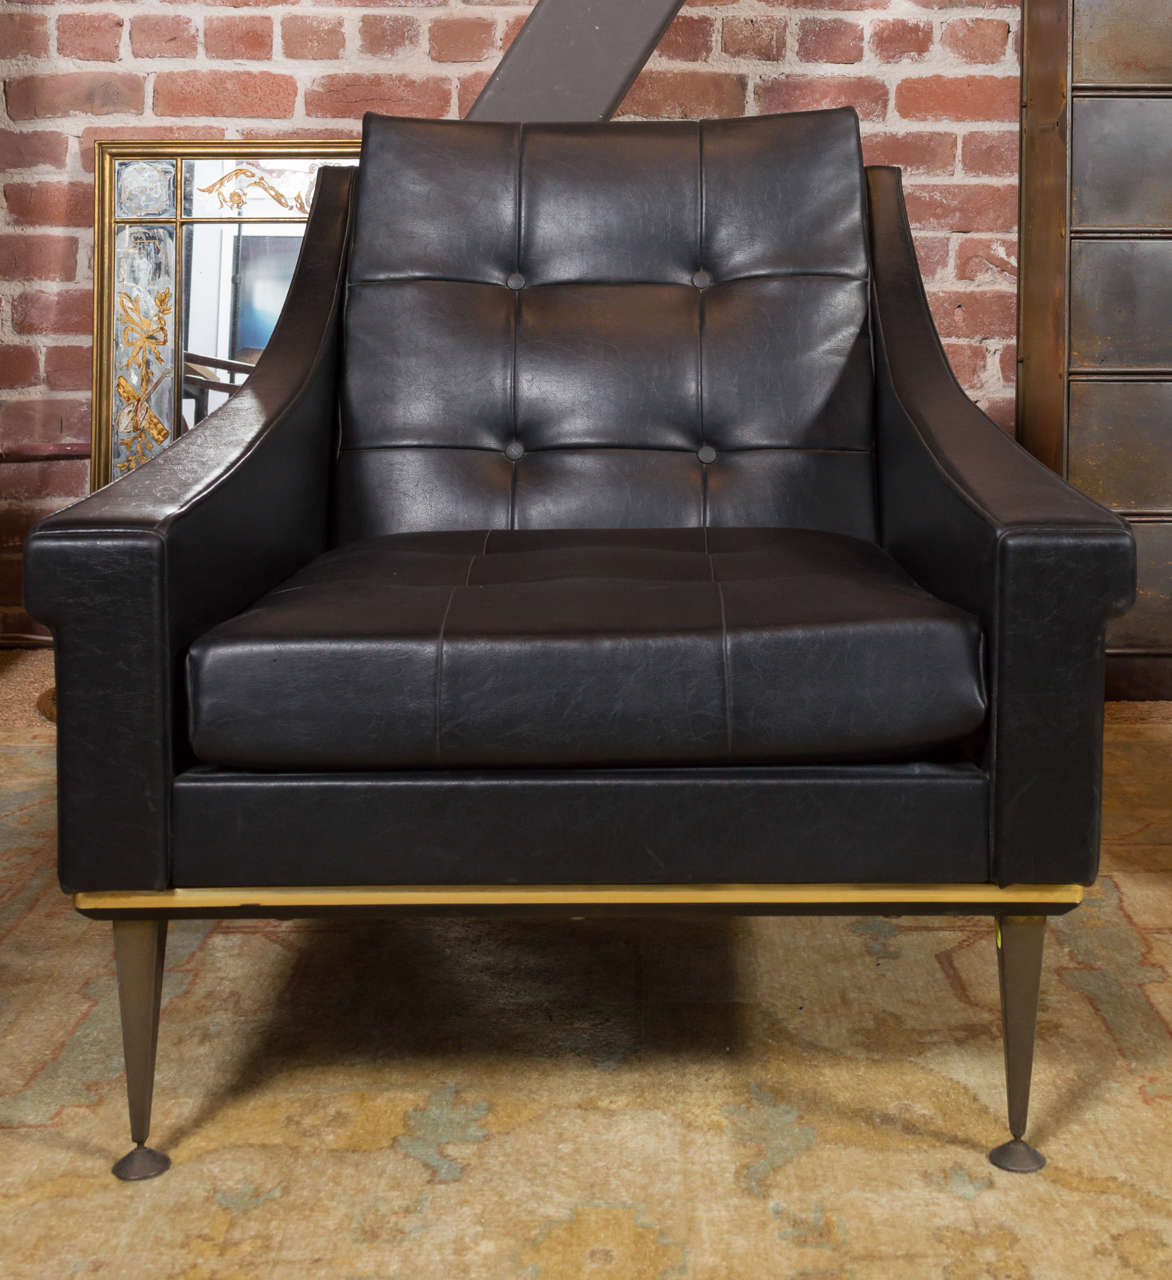 Pair of black leather club chairs having tufted backs and gold details.